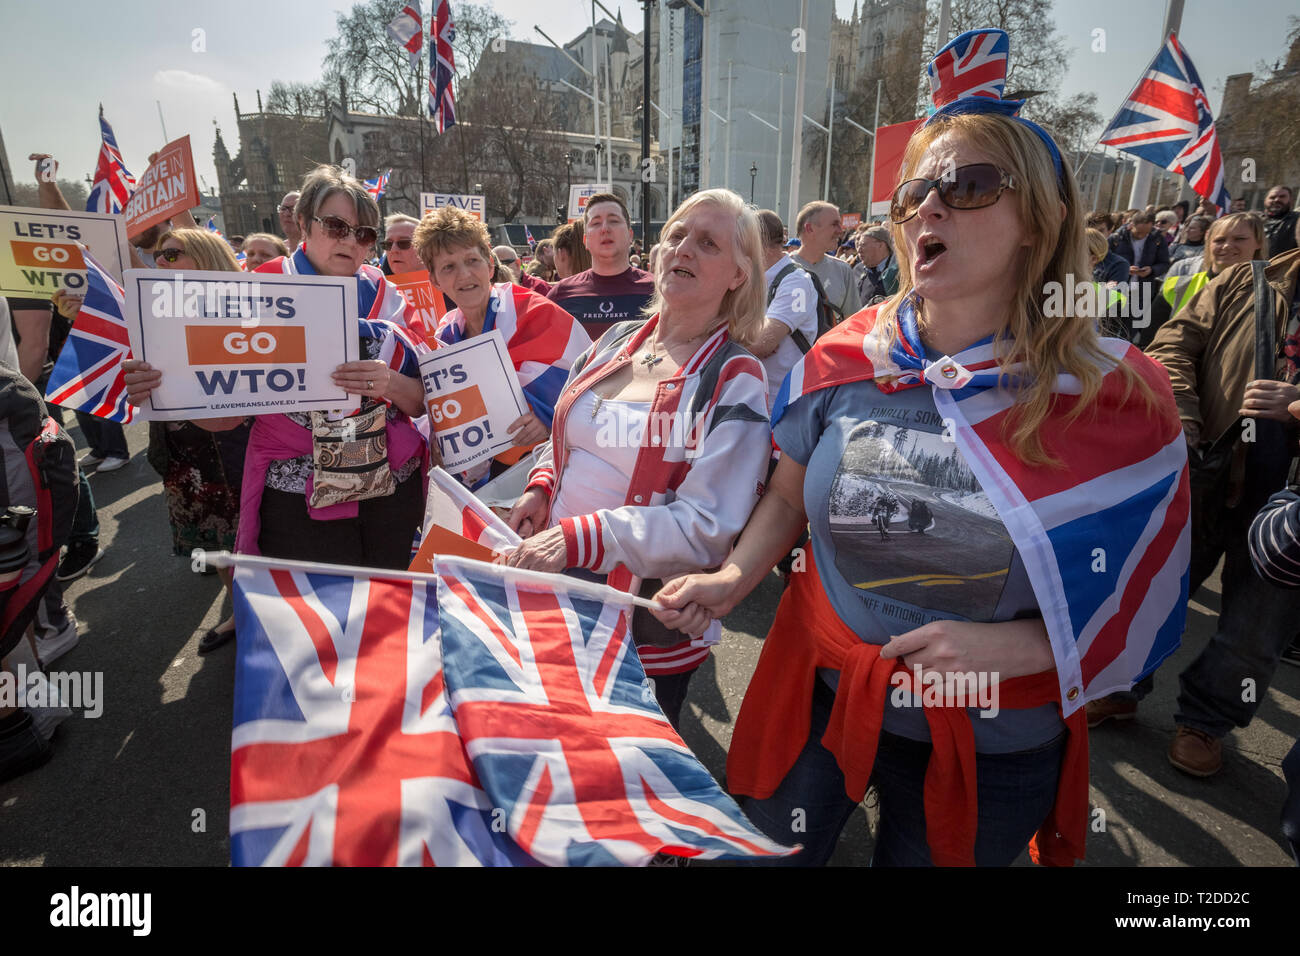 Pro-Brexit supporters gather with flags and placards for ‘Brexit Day’ protest in Westminster demanding Britain leaves the EU without further delay. Stock Photo